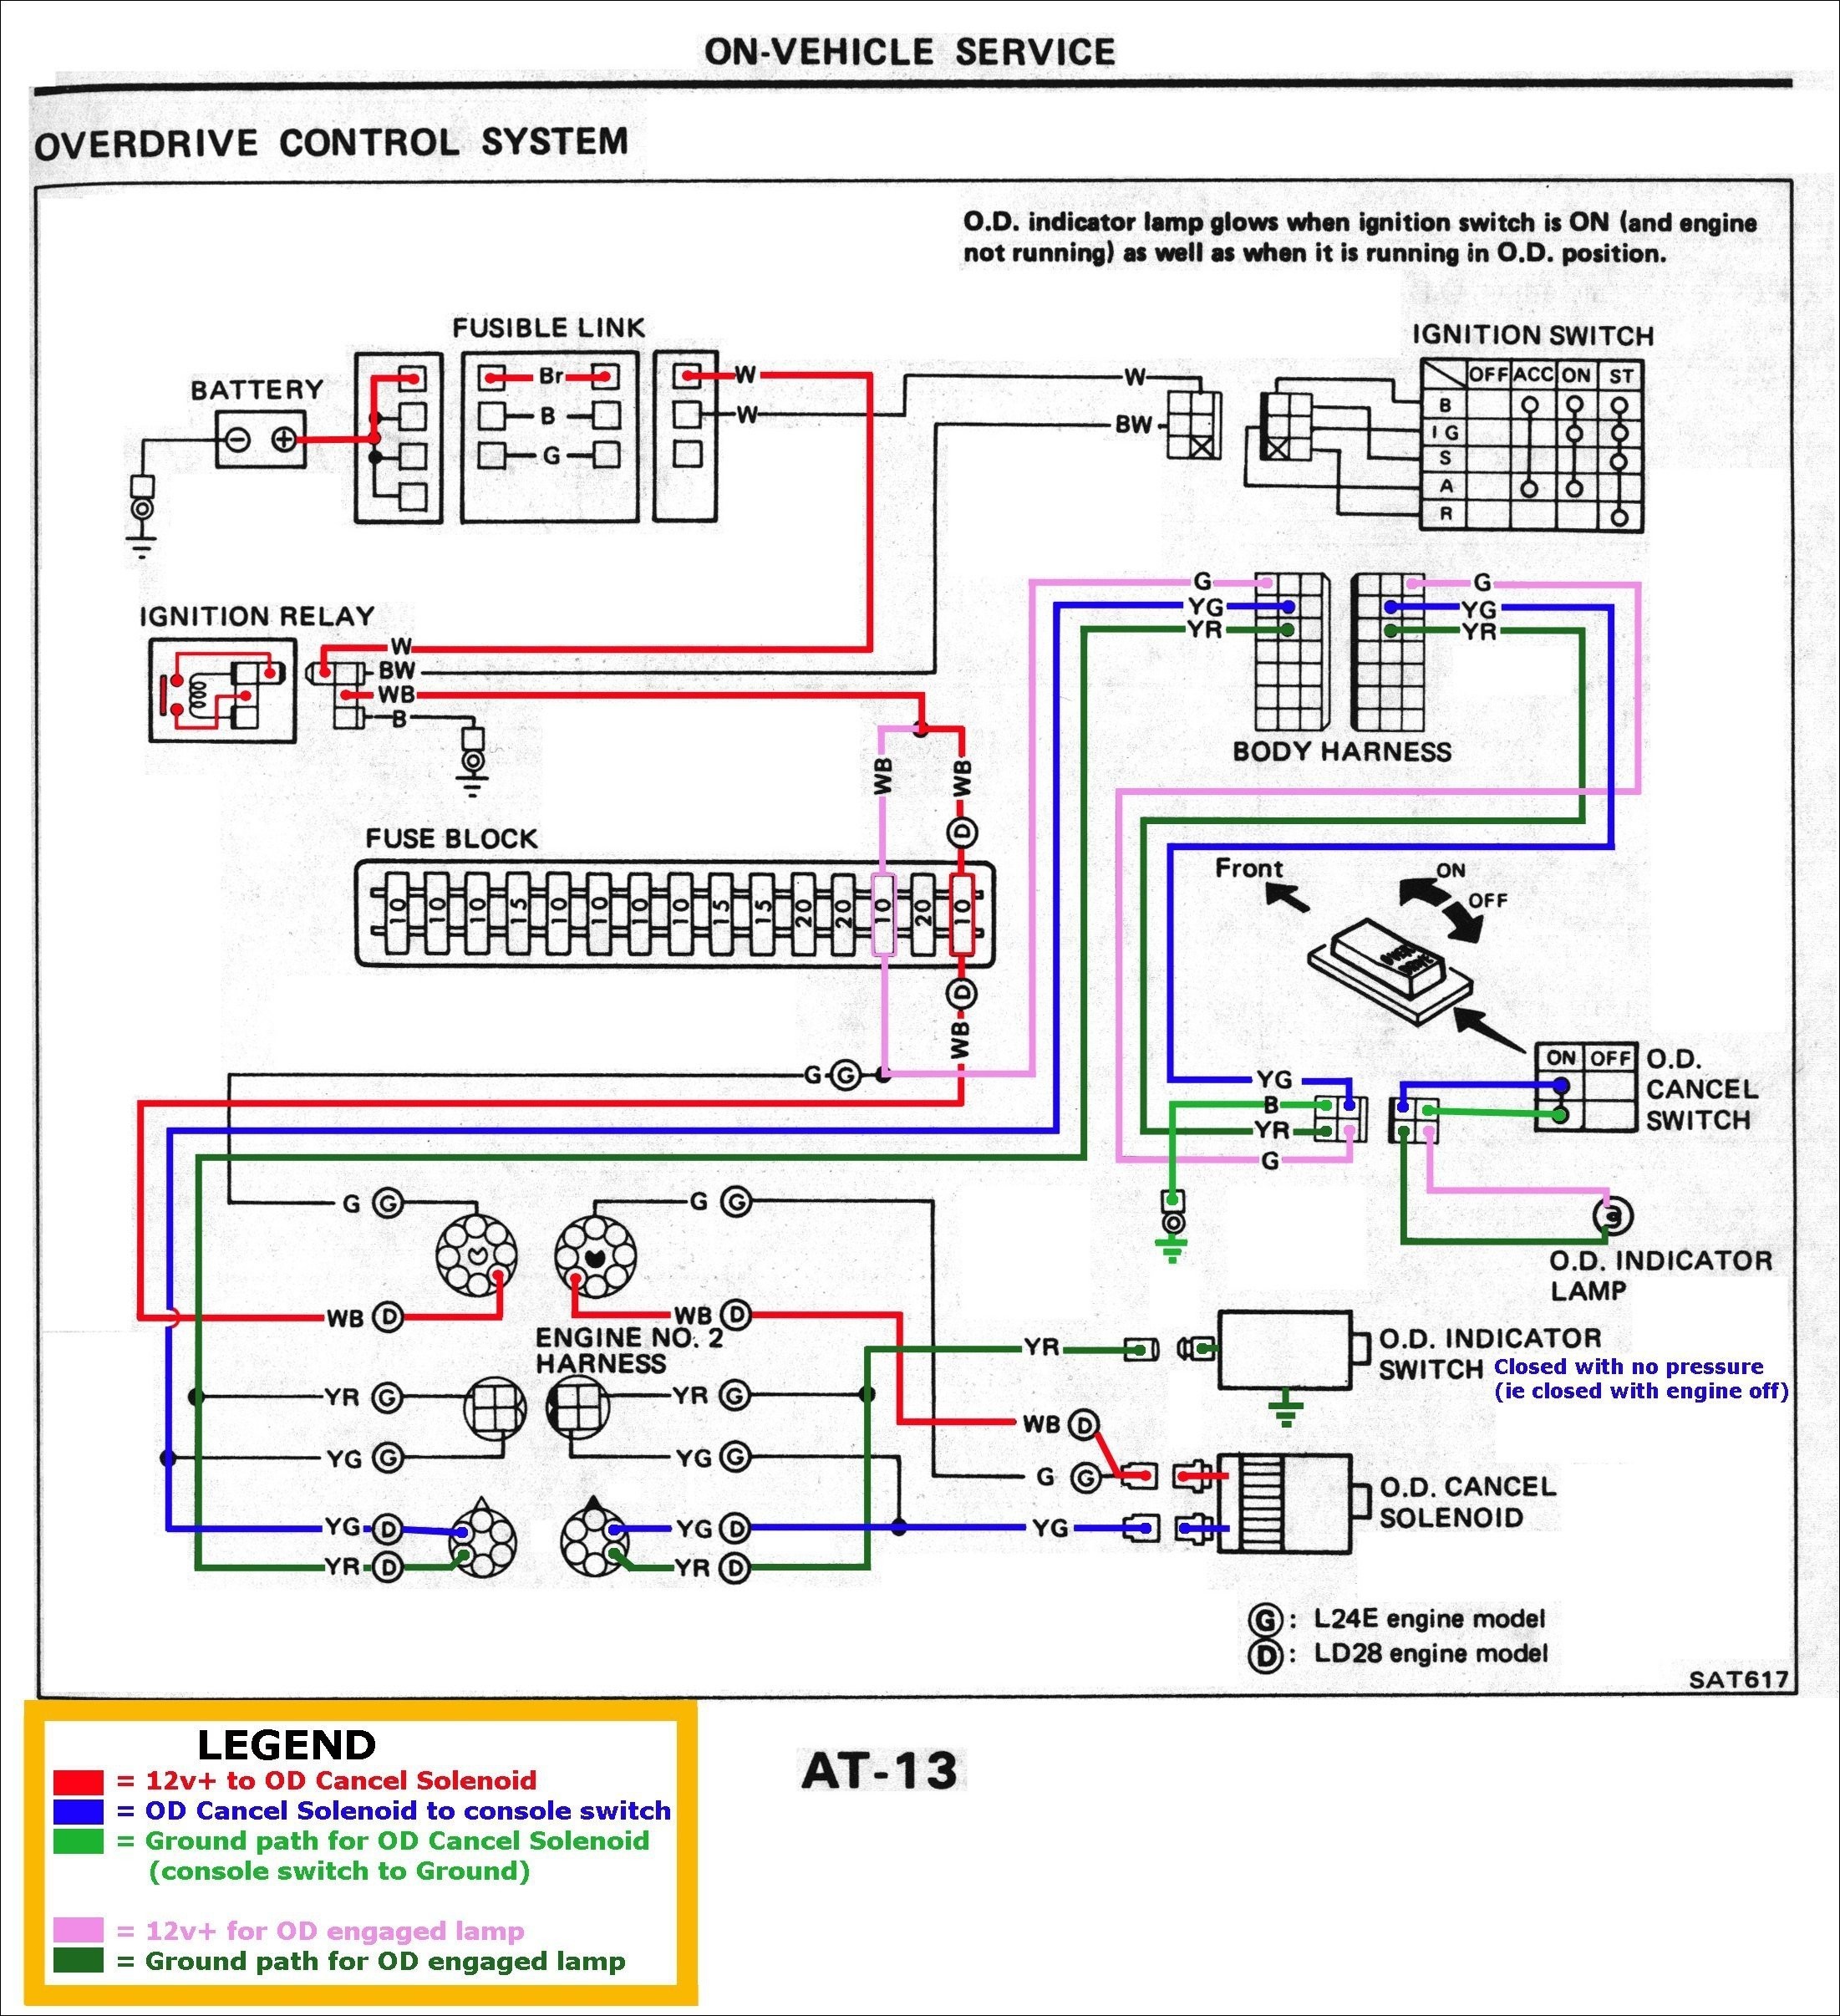 Reading Wiring Diagrams Hvac Refrence New How to Read A Wiring Diagram